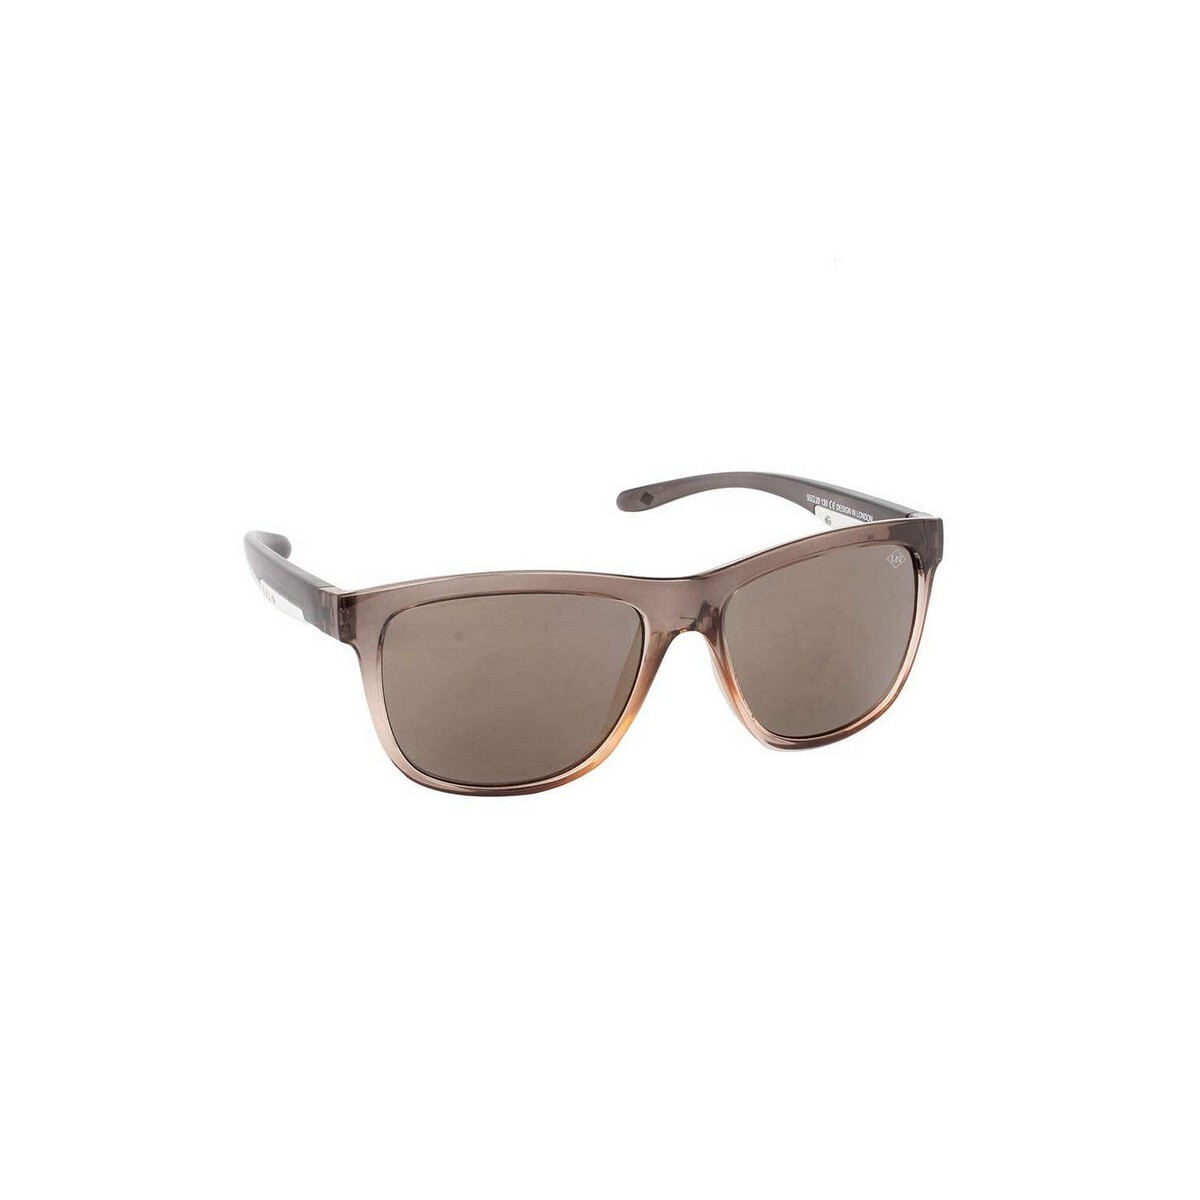 Lee Cooper Male Brown Frame With Silver Lens Sunglass